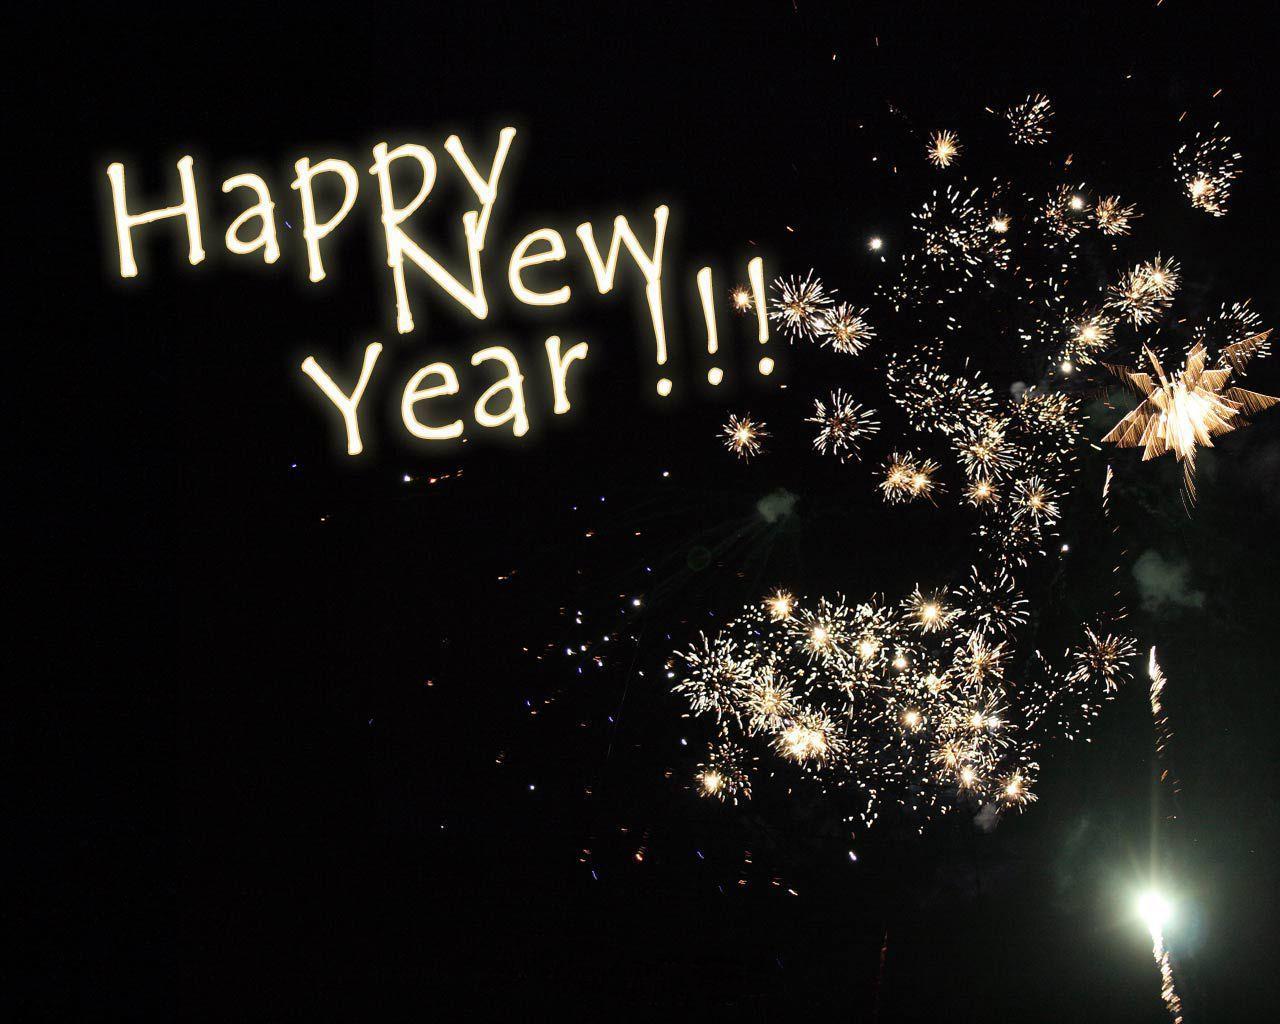 Happy New Year Images HD free download 